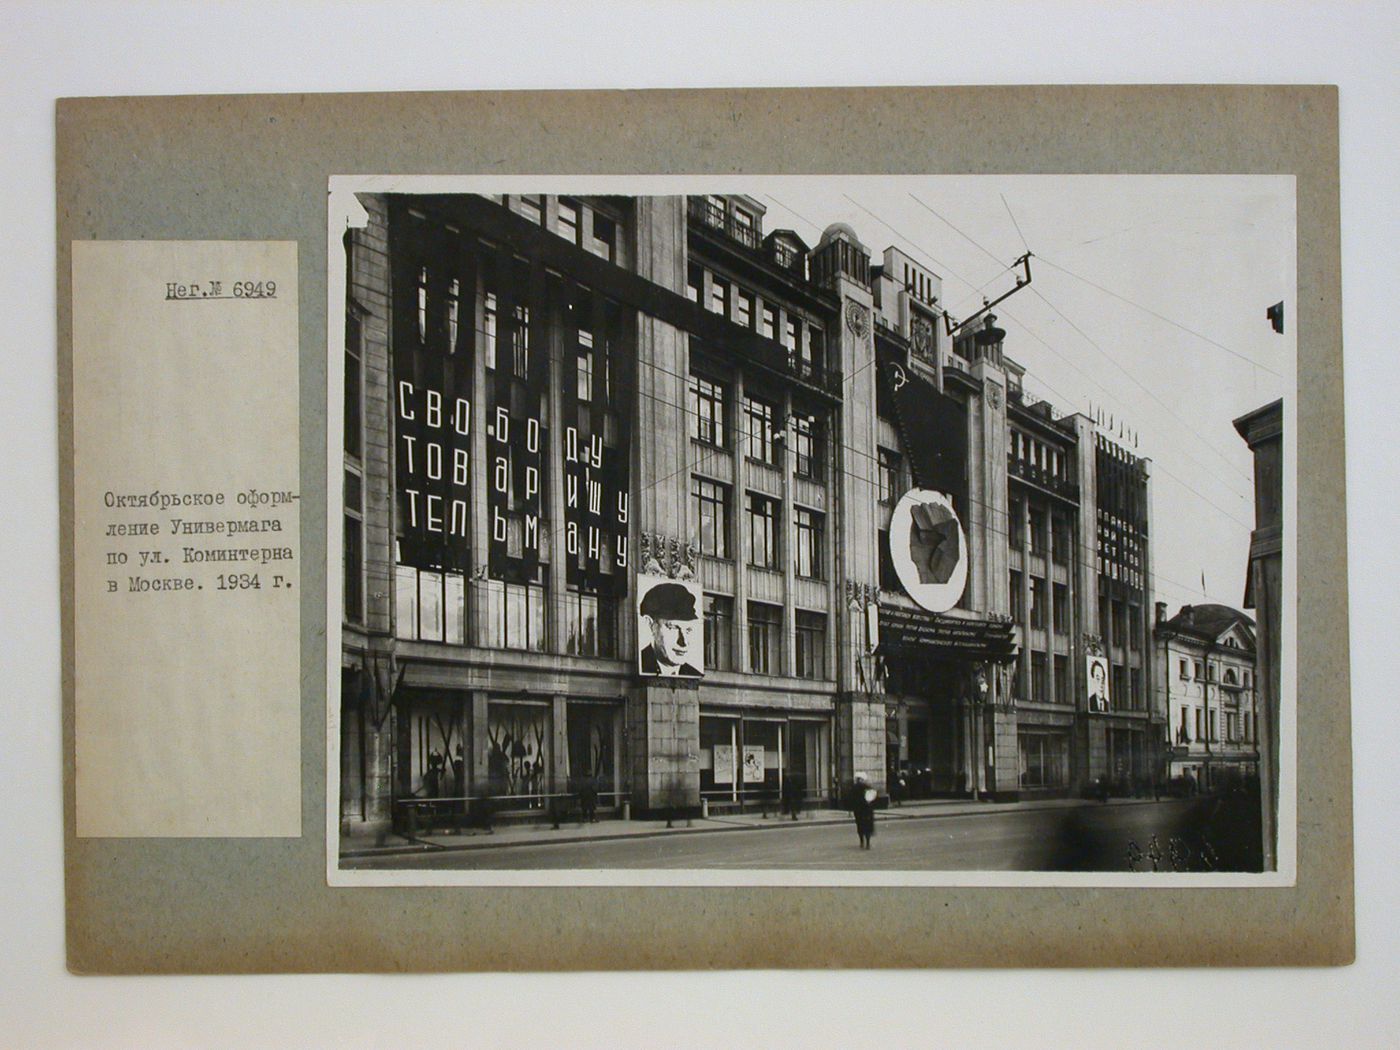 View of the principal façade of a department store showing applied decorations, including two portraits of unidentified men, in celebration of the 17th anniversary of the Bolshevik Revolution, Kominterna Street, Moscow, Soviet Union (now in Russia)